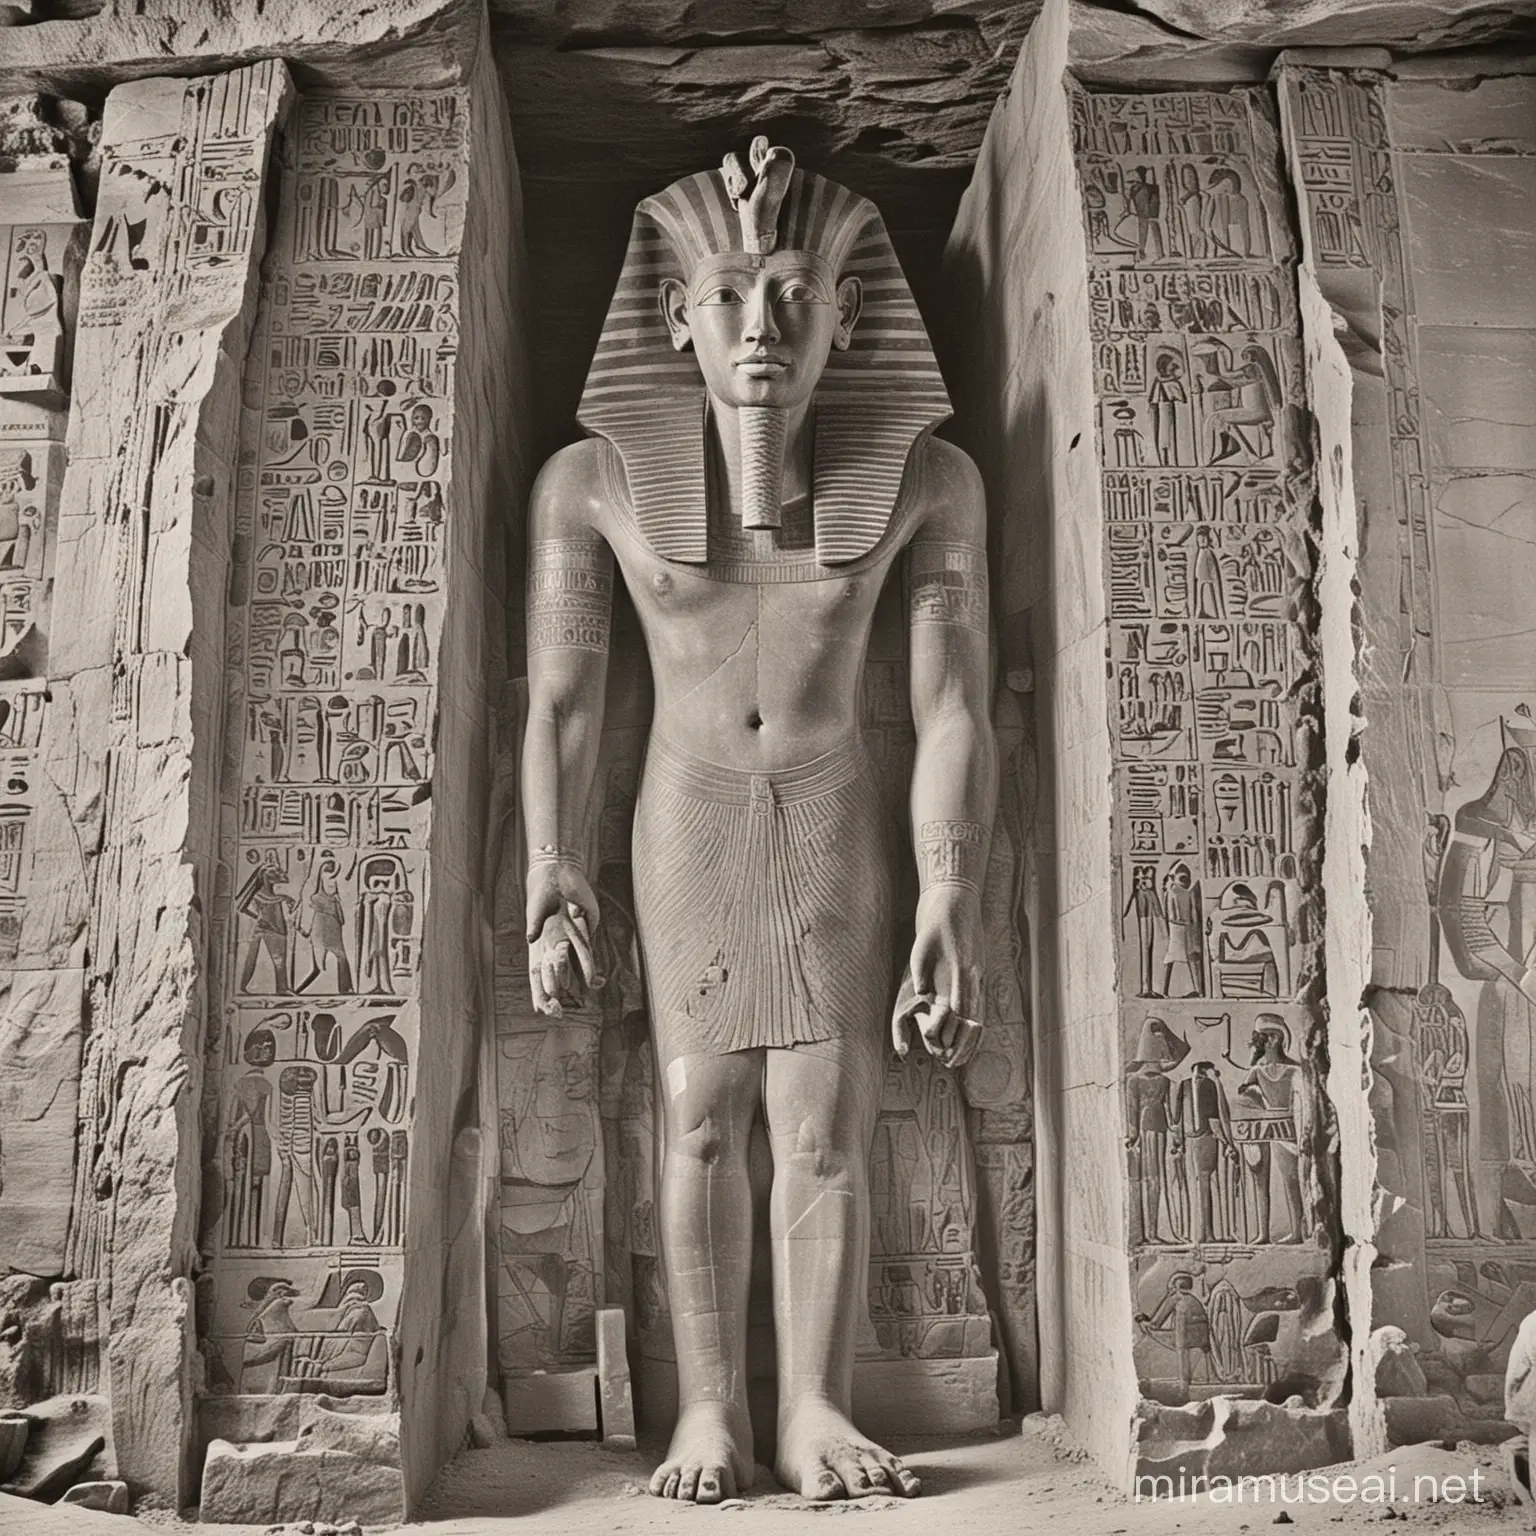 historic photo of pharaoh sarcophagus in an egyptian tomb